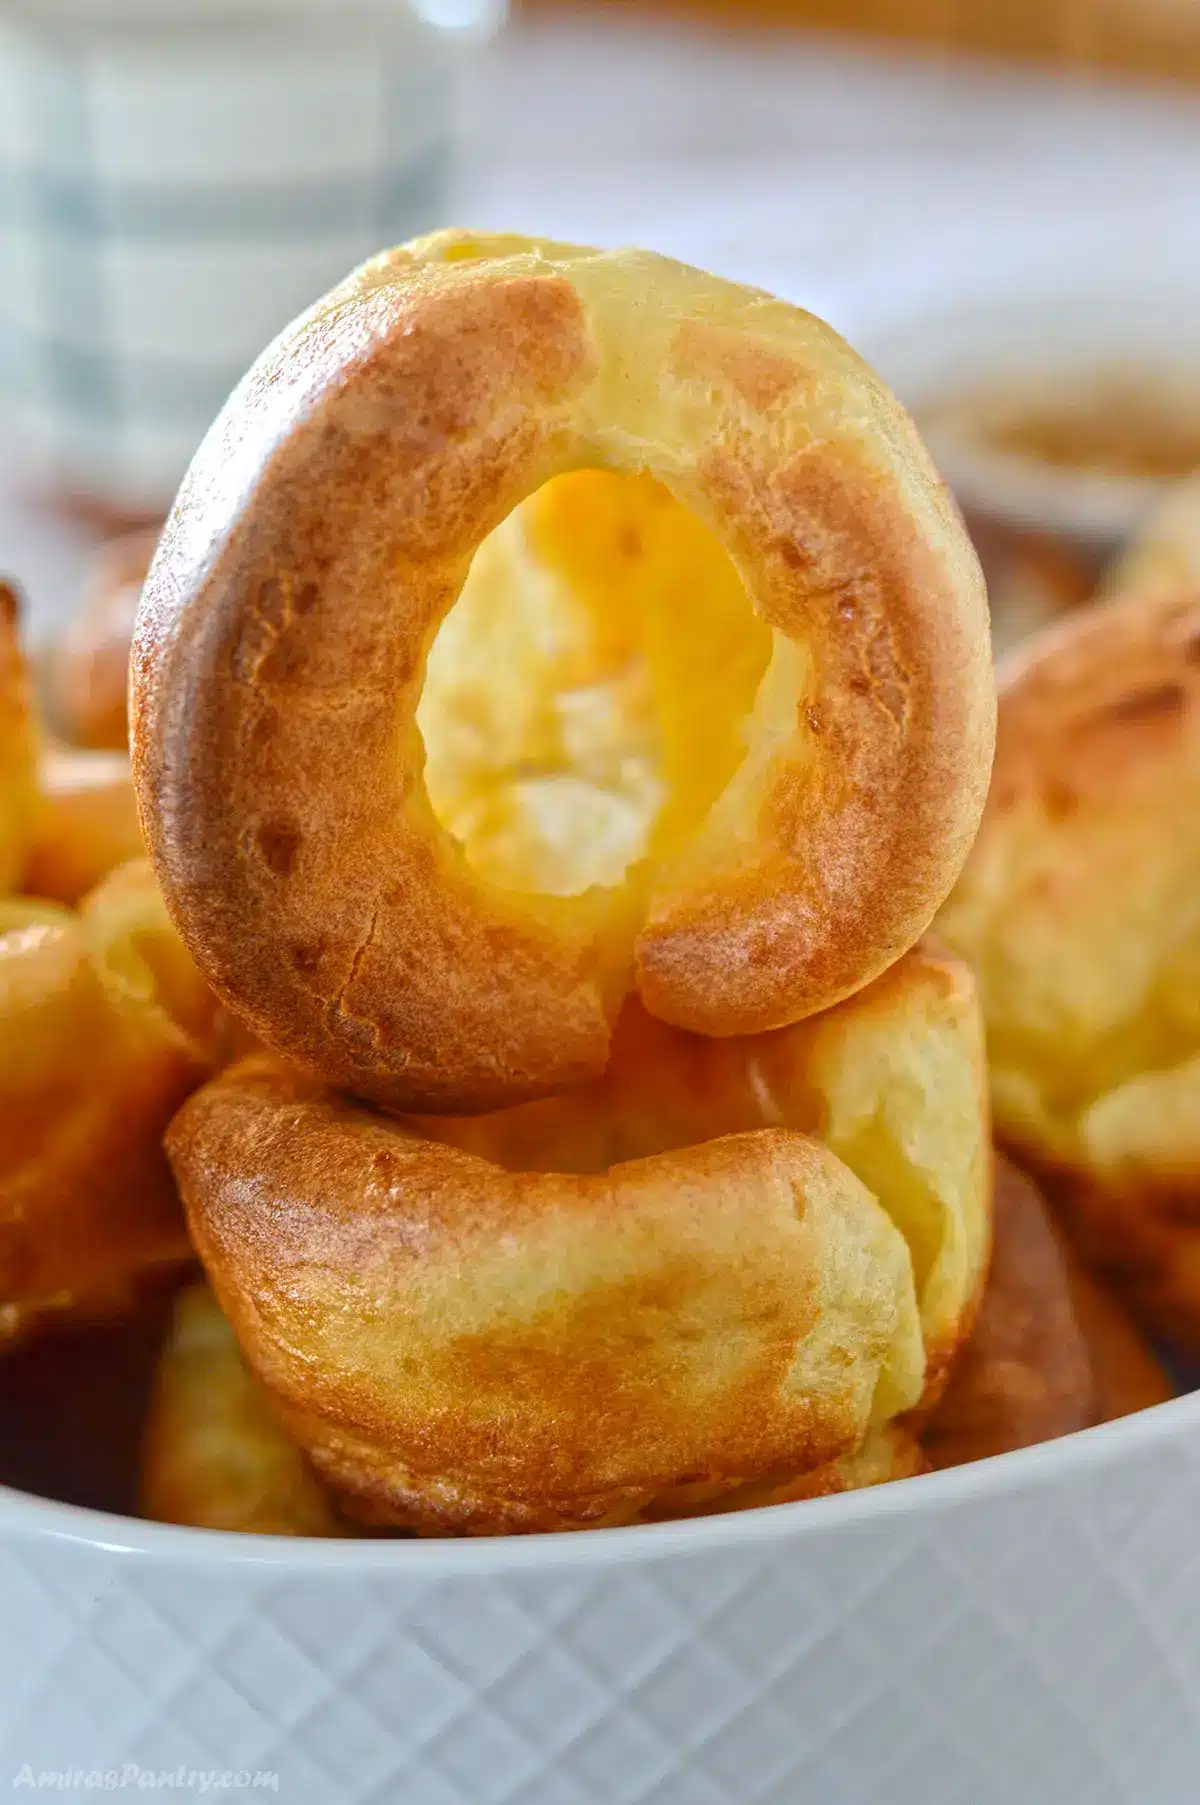 A stack of Yorkshire pudding showing a hollow one on top.